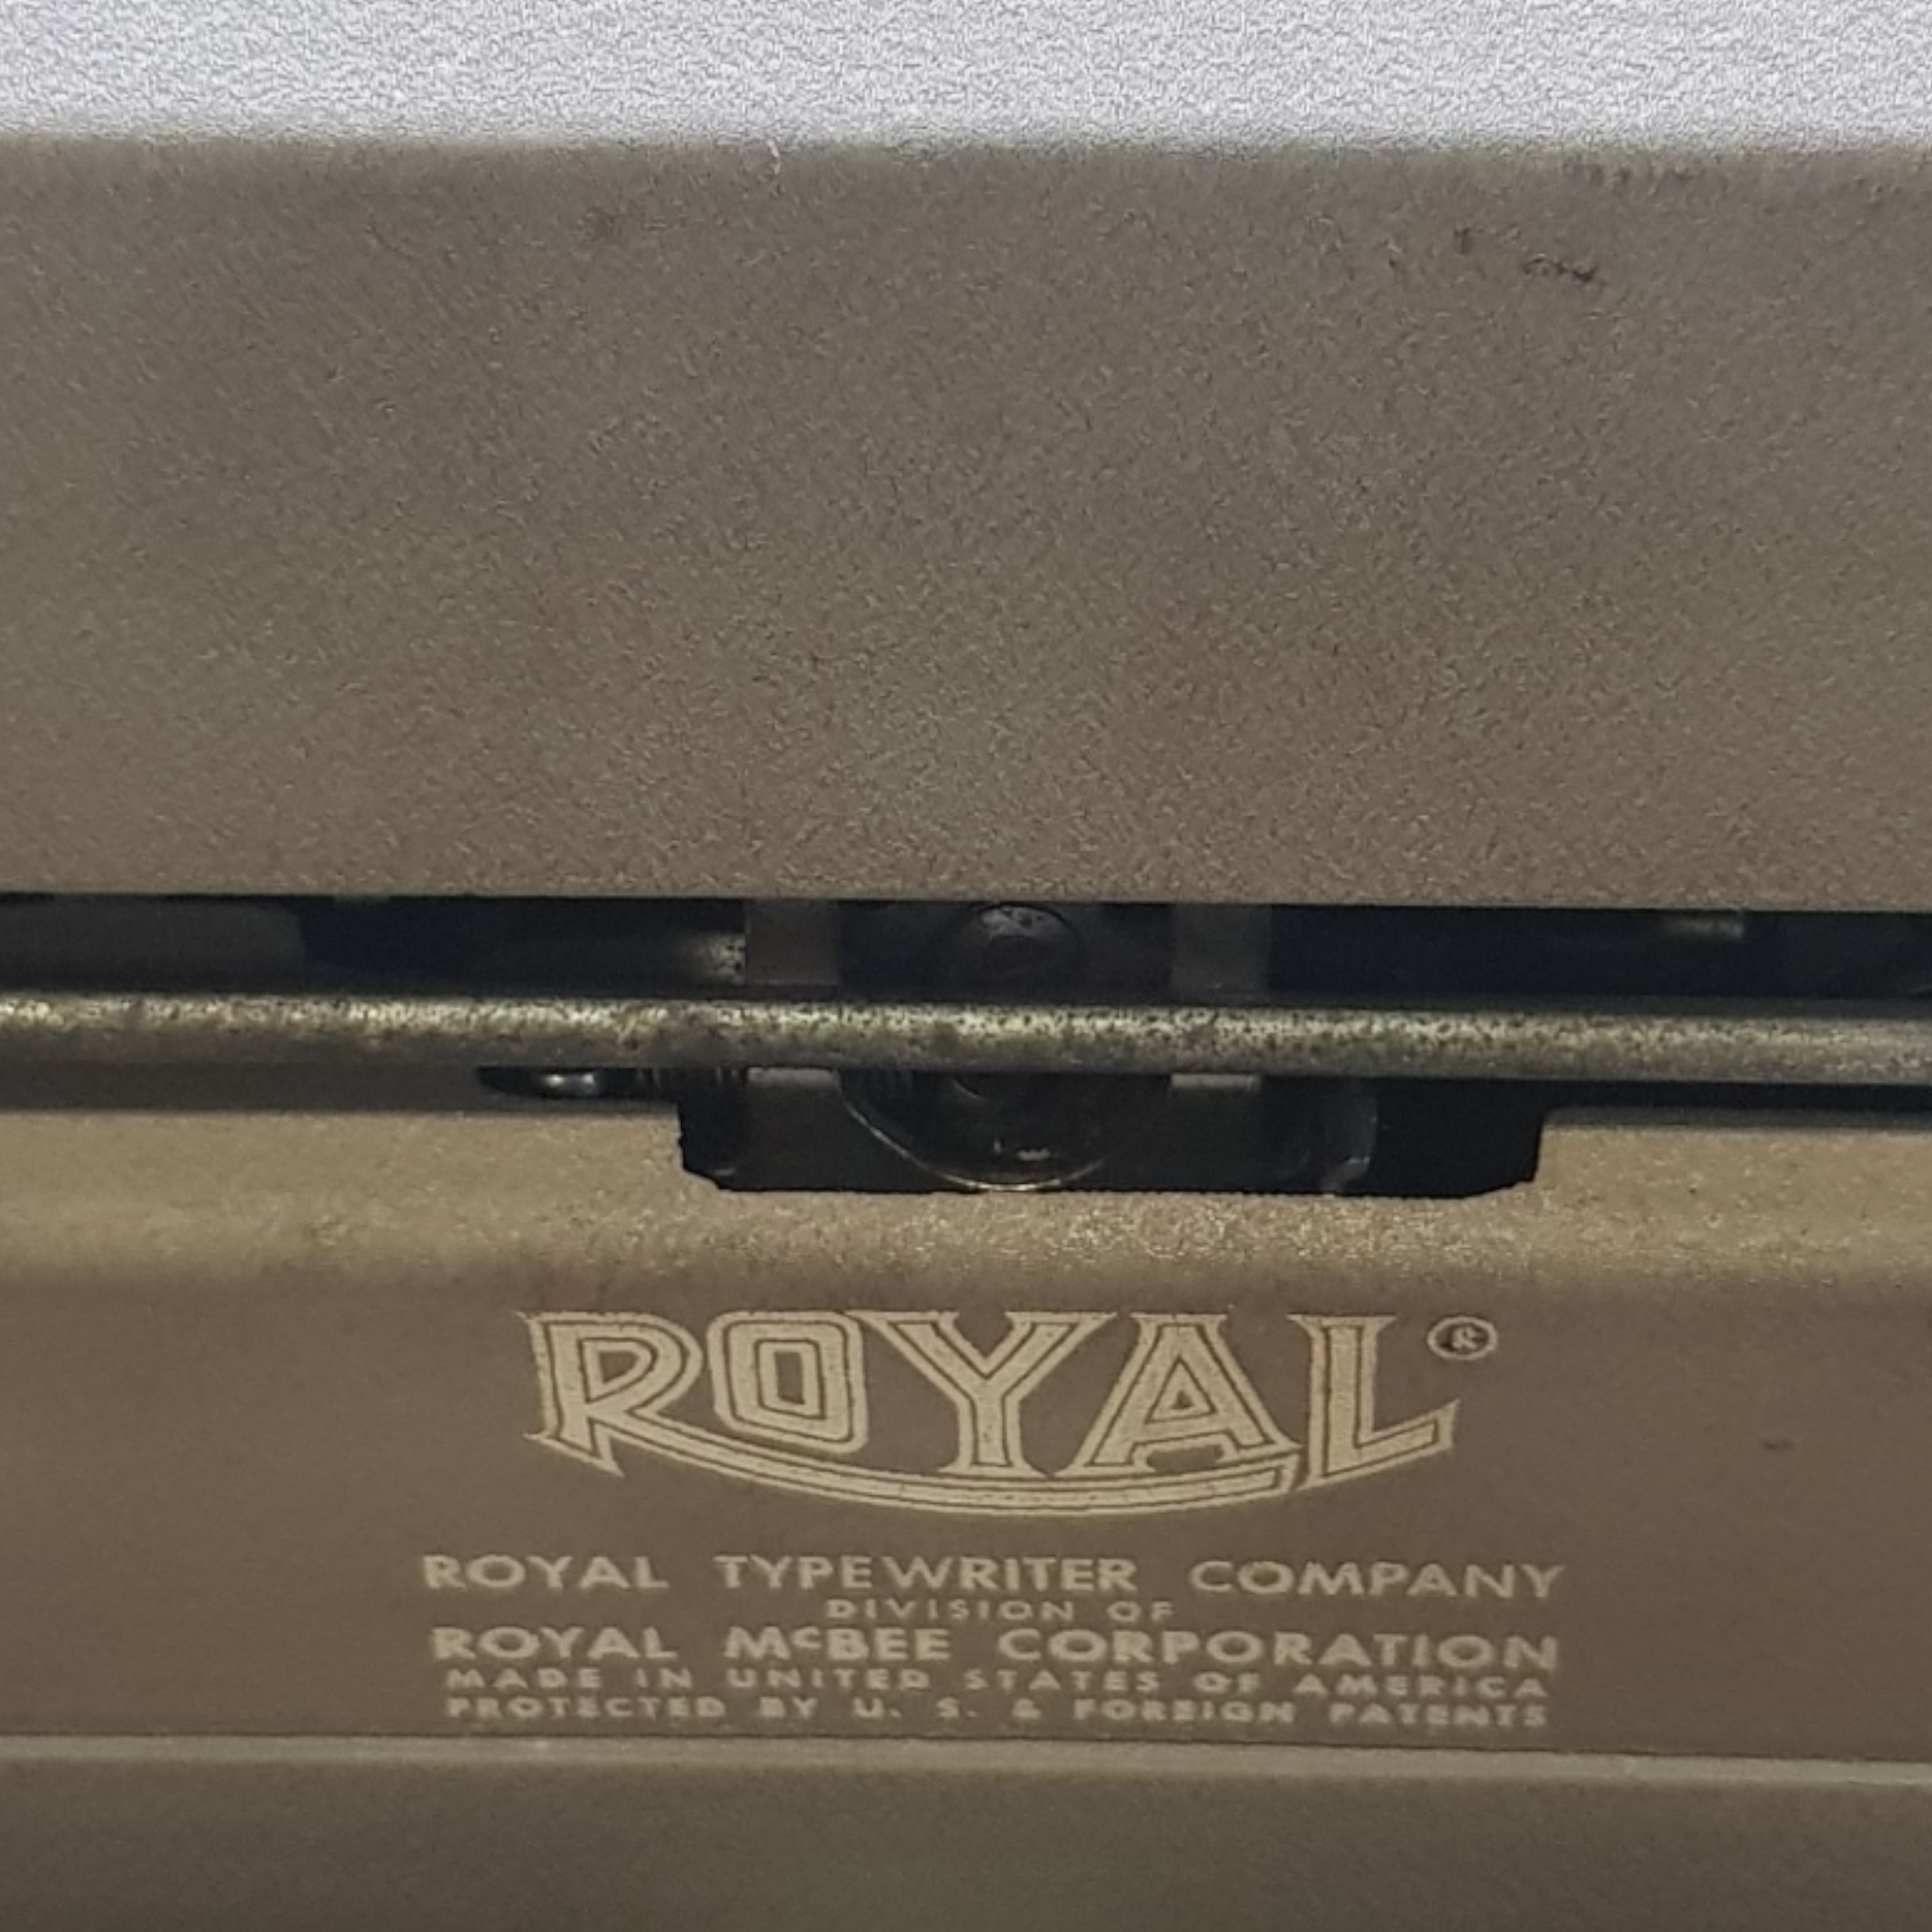 Image of Royal Aristocrat Typewriter. A mid Size Rare Portable Typewriter. Made in the USA. Available from Universal Typewriter Company.